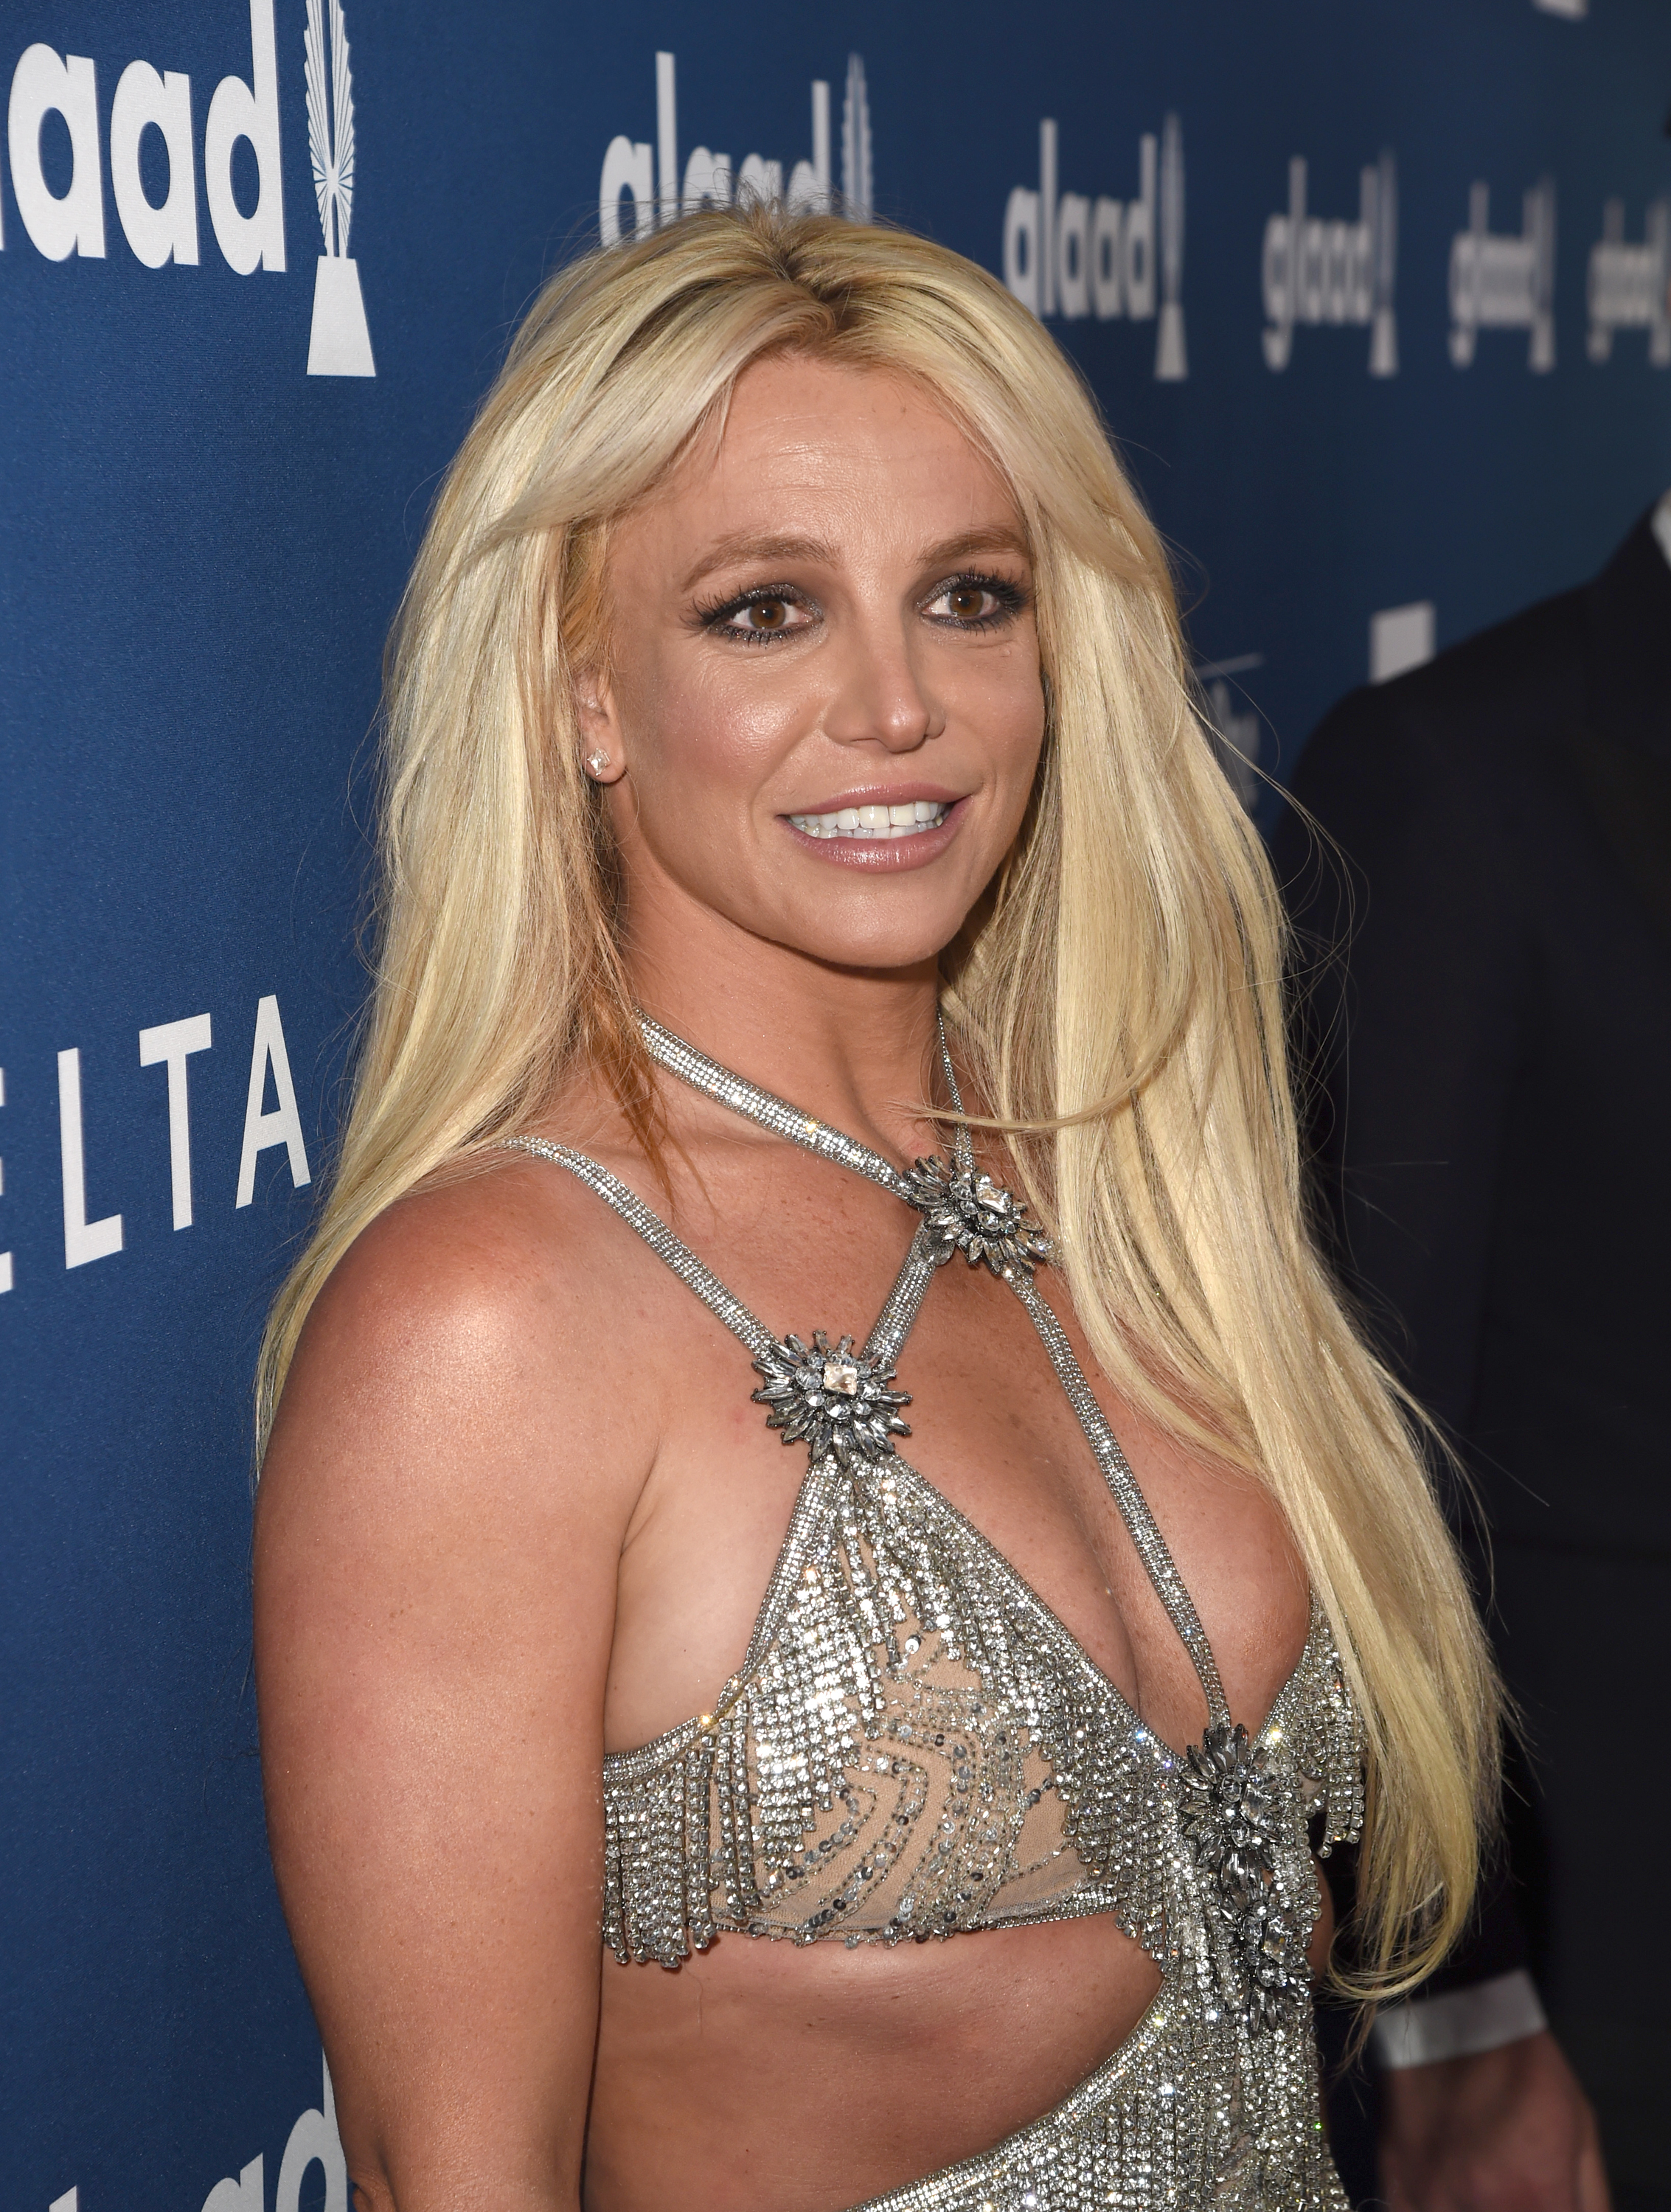 Close-up of Britney smiling at a press event